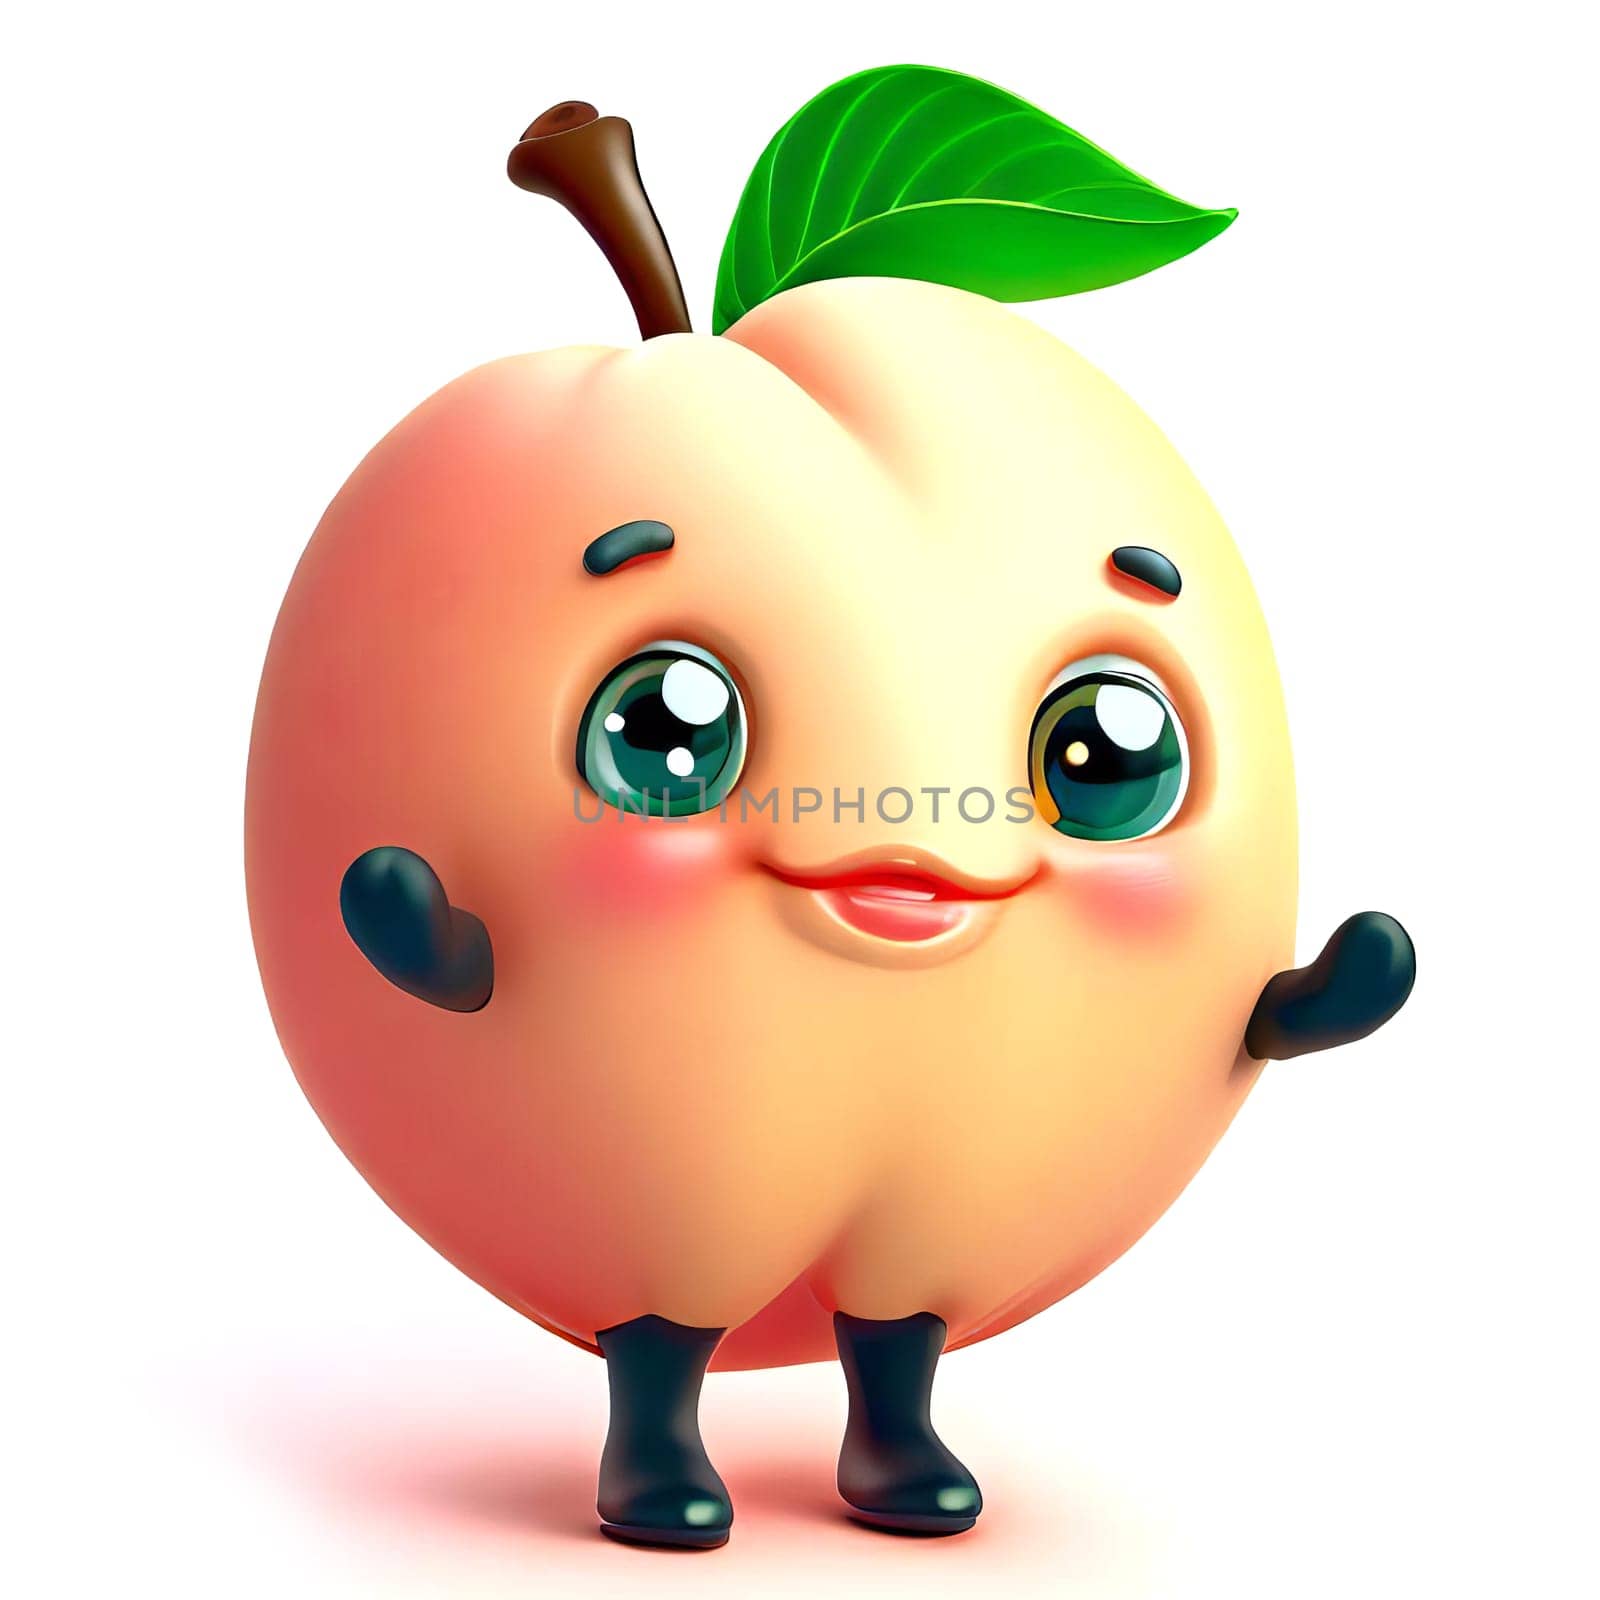 Cute cartoon 3d character of smiling ripe apricot or peach, digitally generated illustration